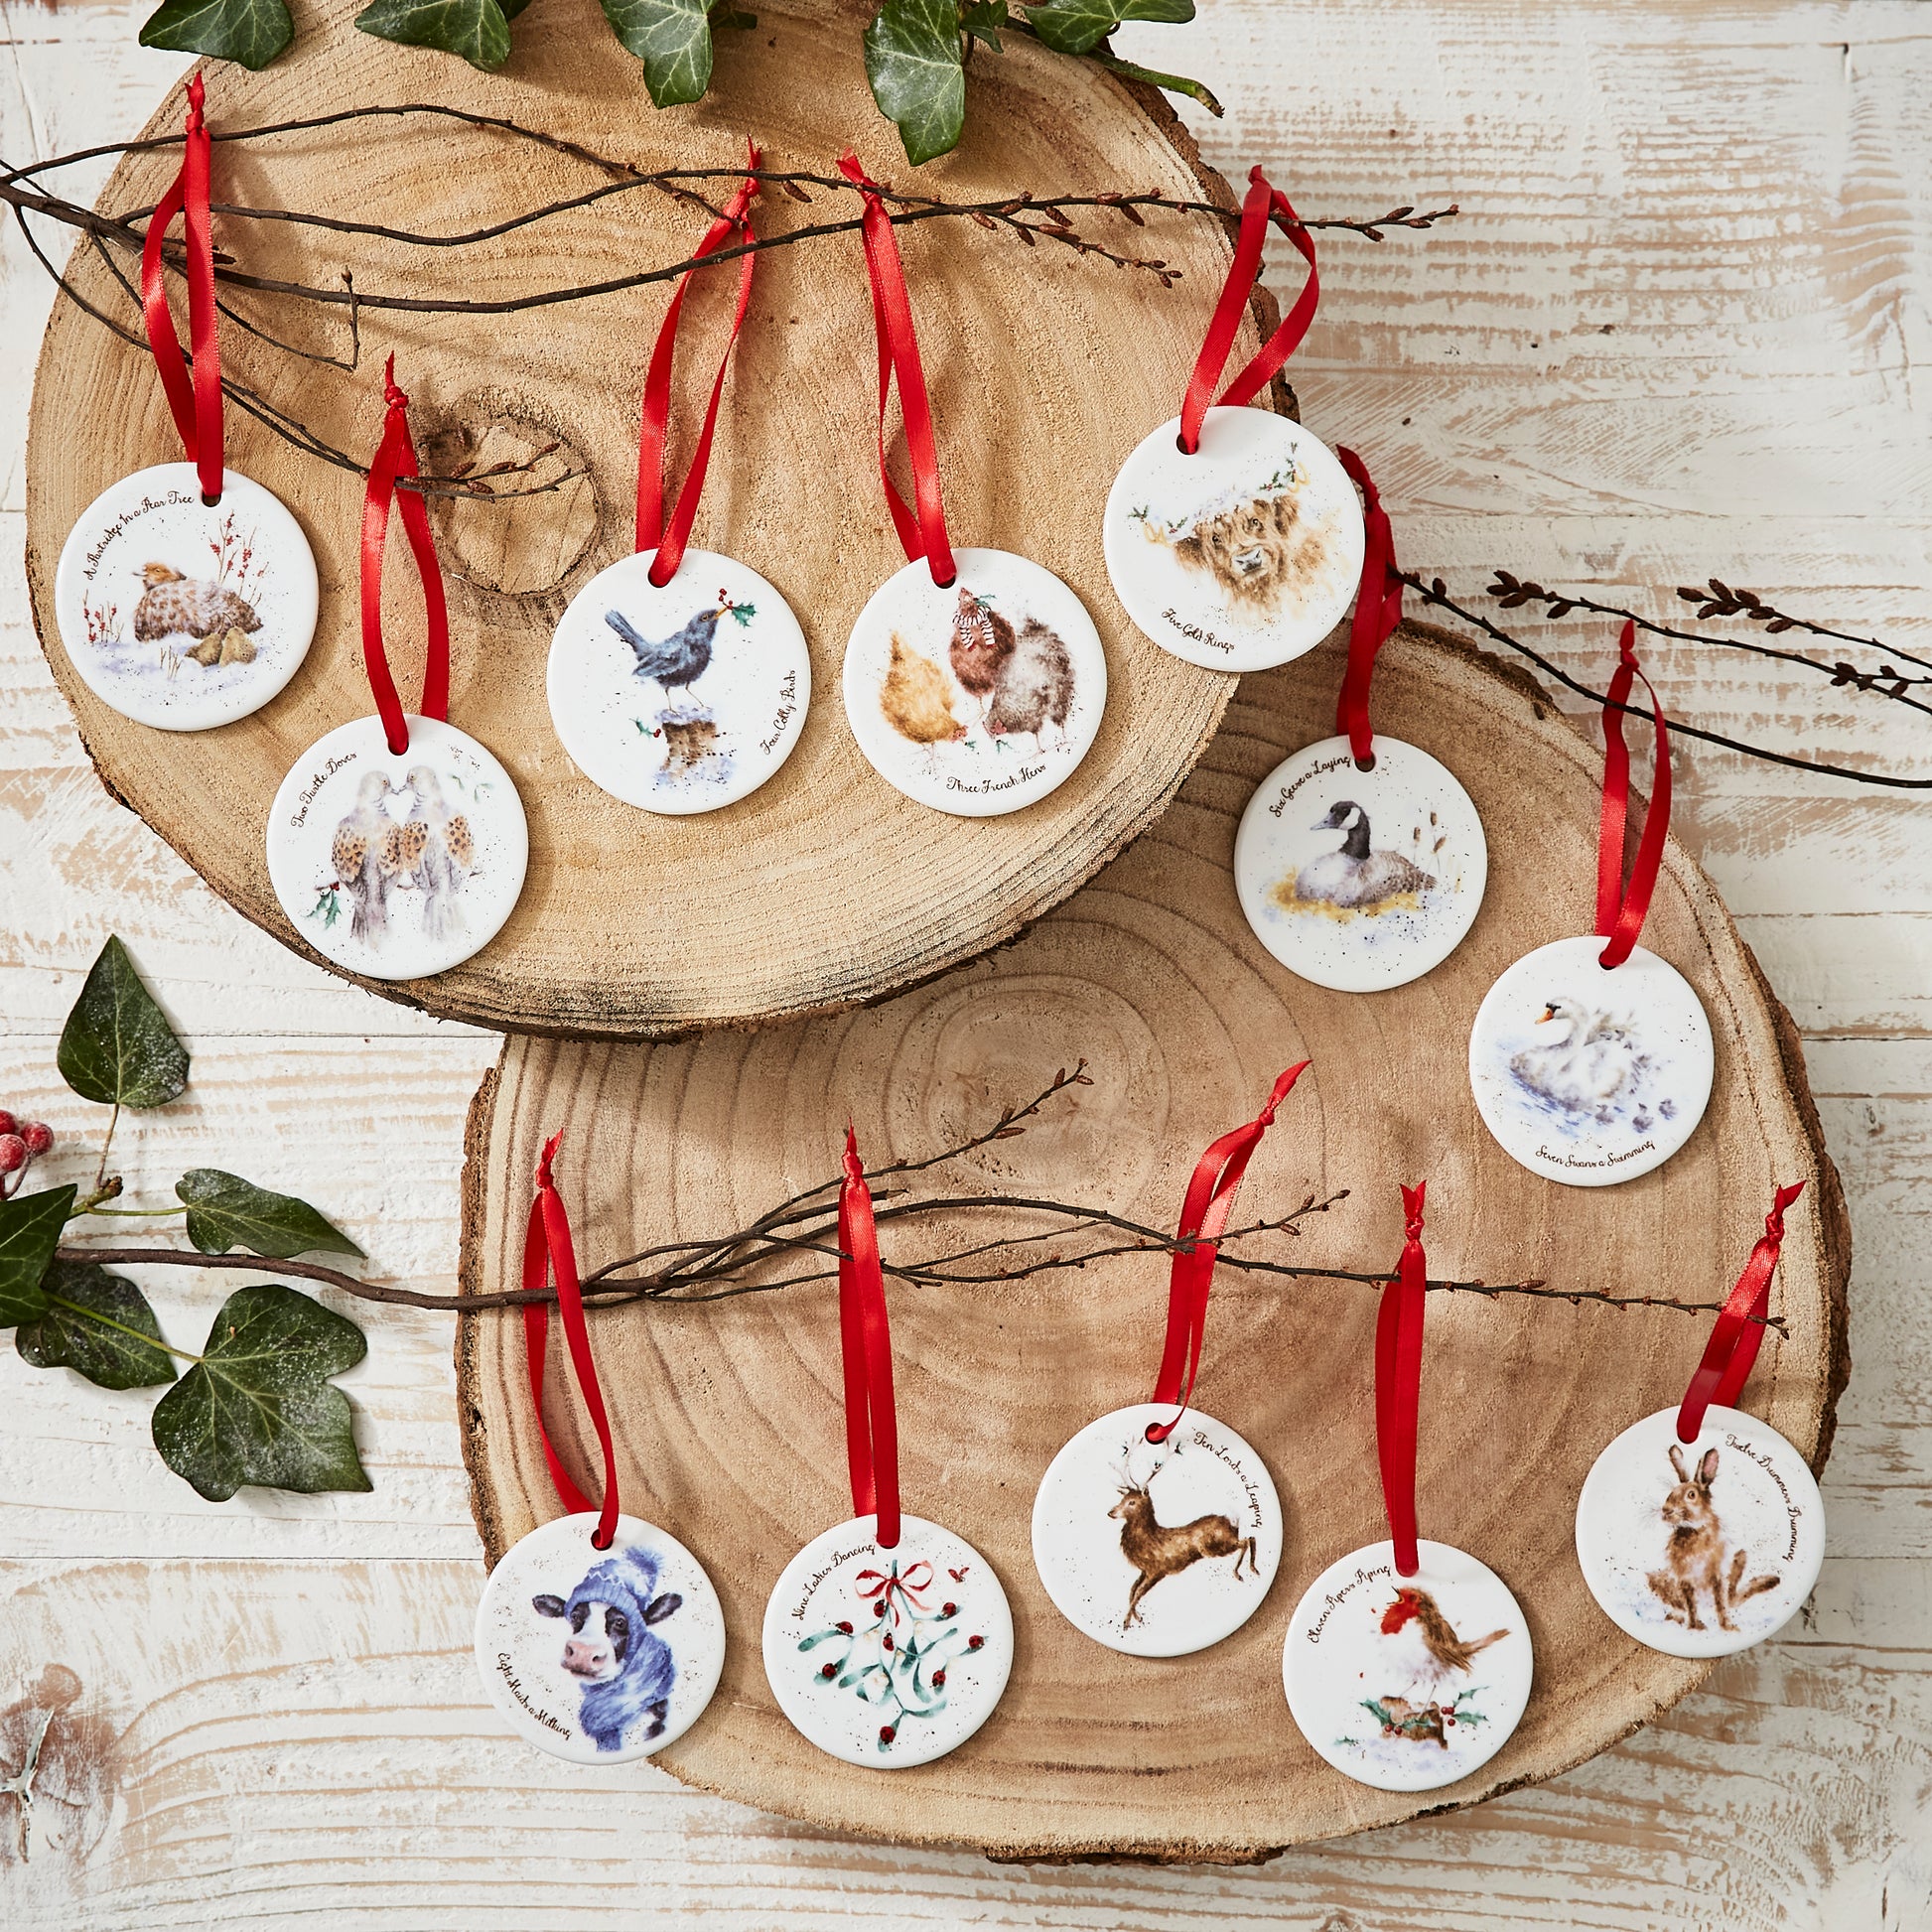 Royal Worcester Wrendale Designs 12 Days of Christmas Decorations ...